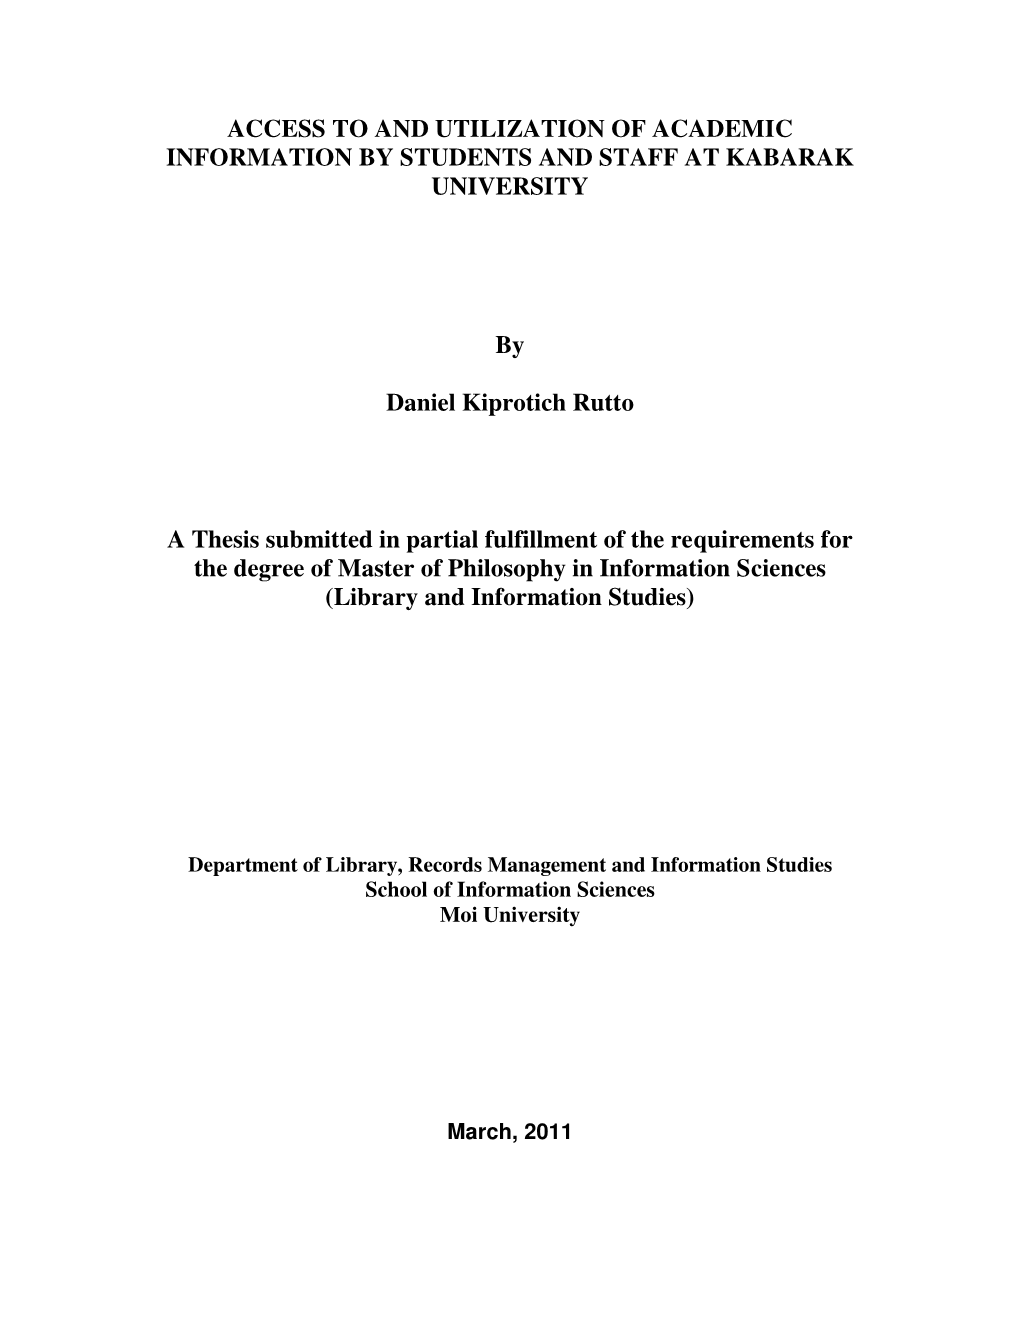 Access to and Utilization of Academic Information by Students and Staff at Kabarak University